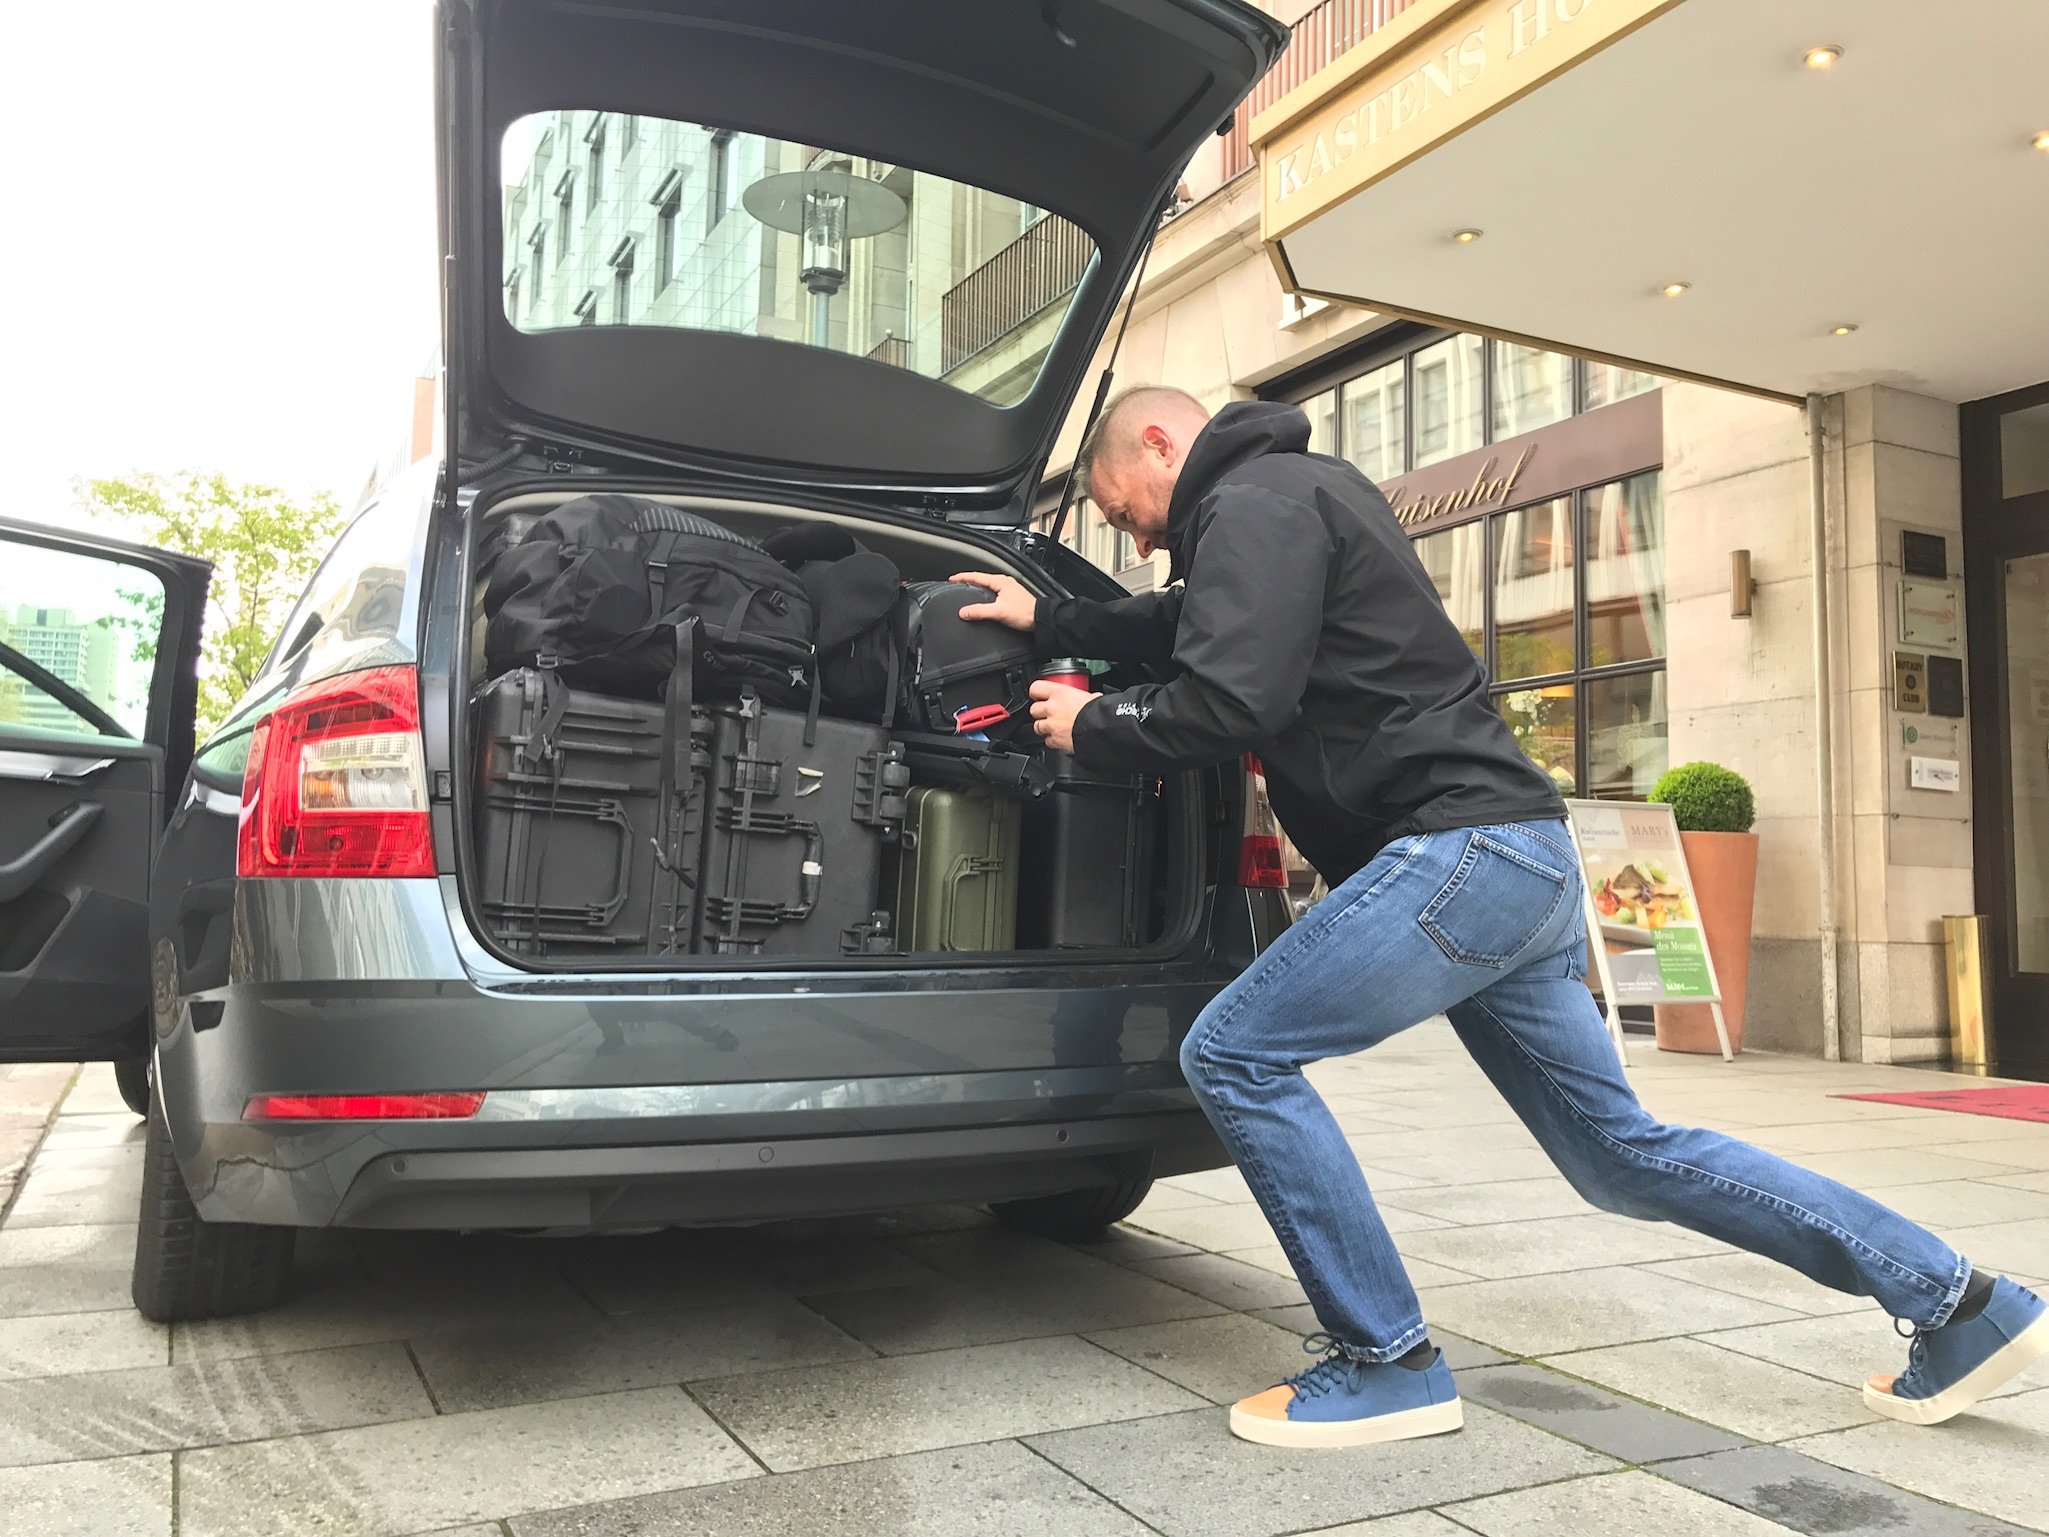 Dave is skilled in the art of Pelican case trunk tetris.